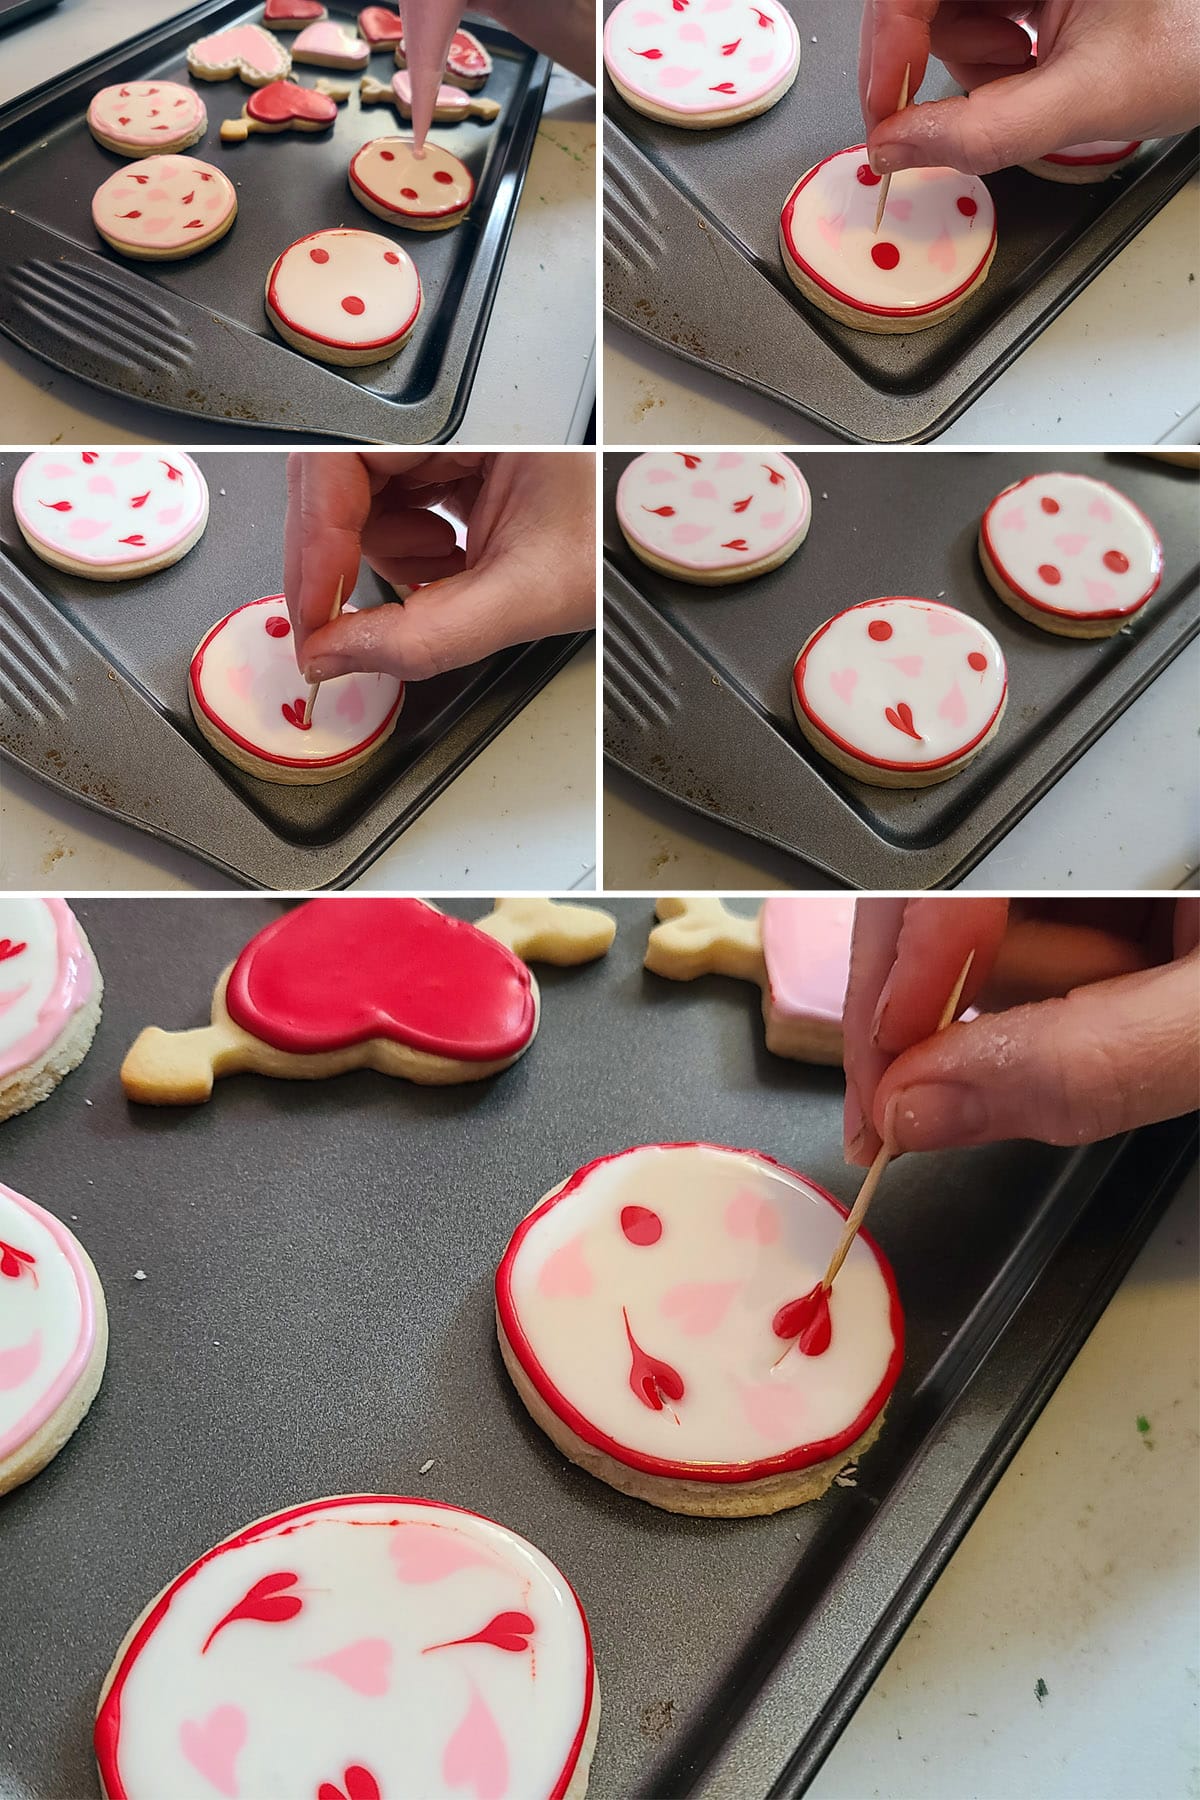 A 5 part image showing the random pulled hearts cookie decorating technique.